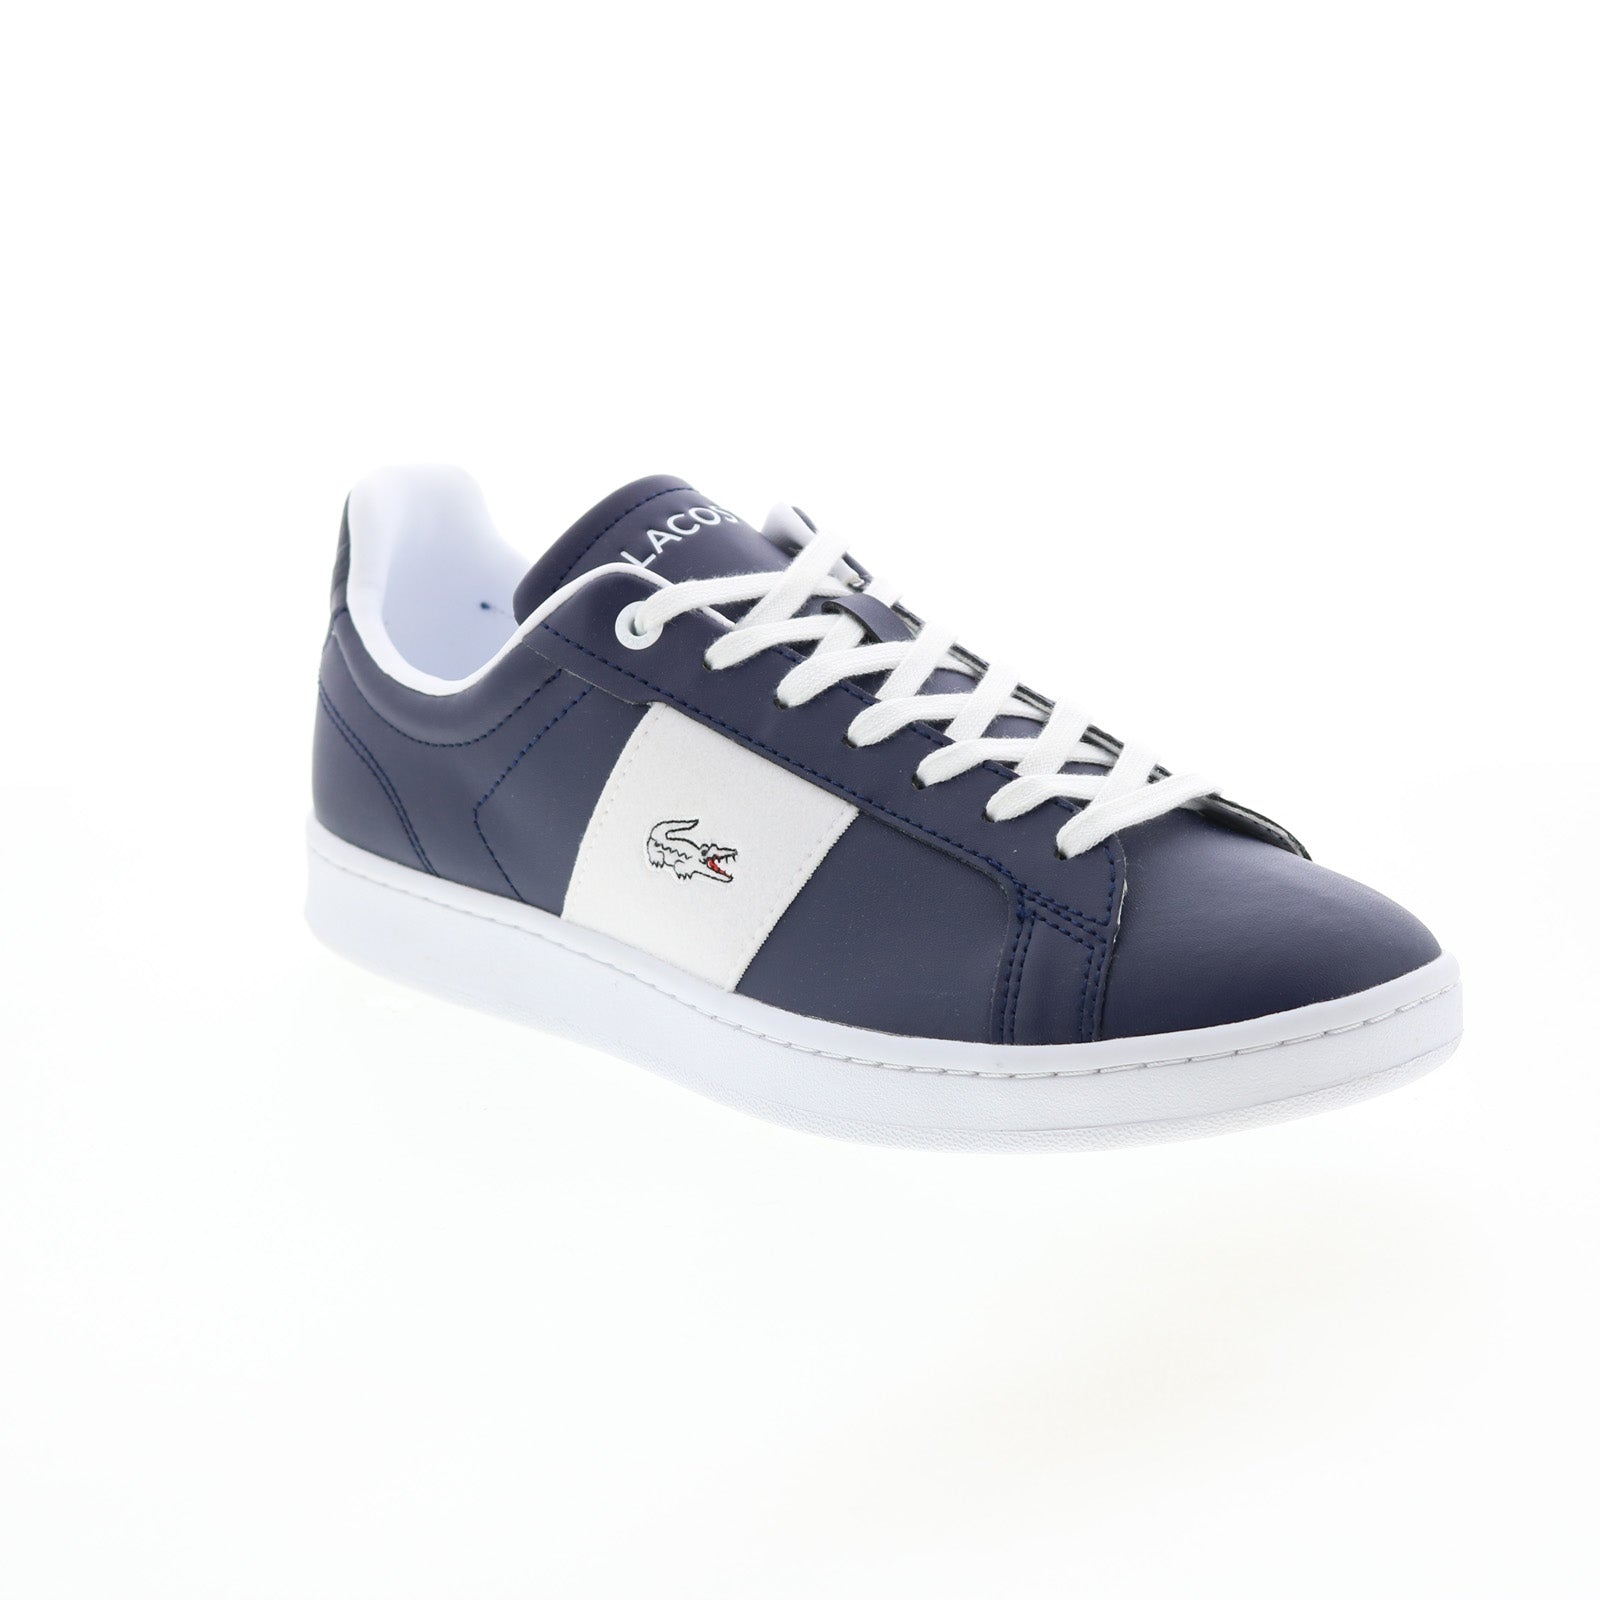 Ass Handschrift toren Lacoste Carnaby Pro CGR 123 6 Mens Blue Leather Lifestyle Sneakers Sho -  Ruze Shoes